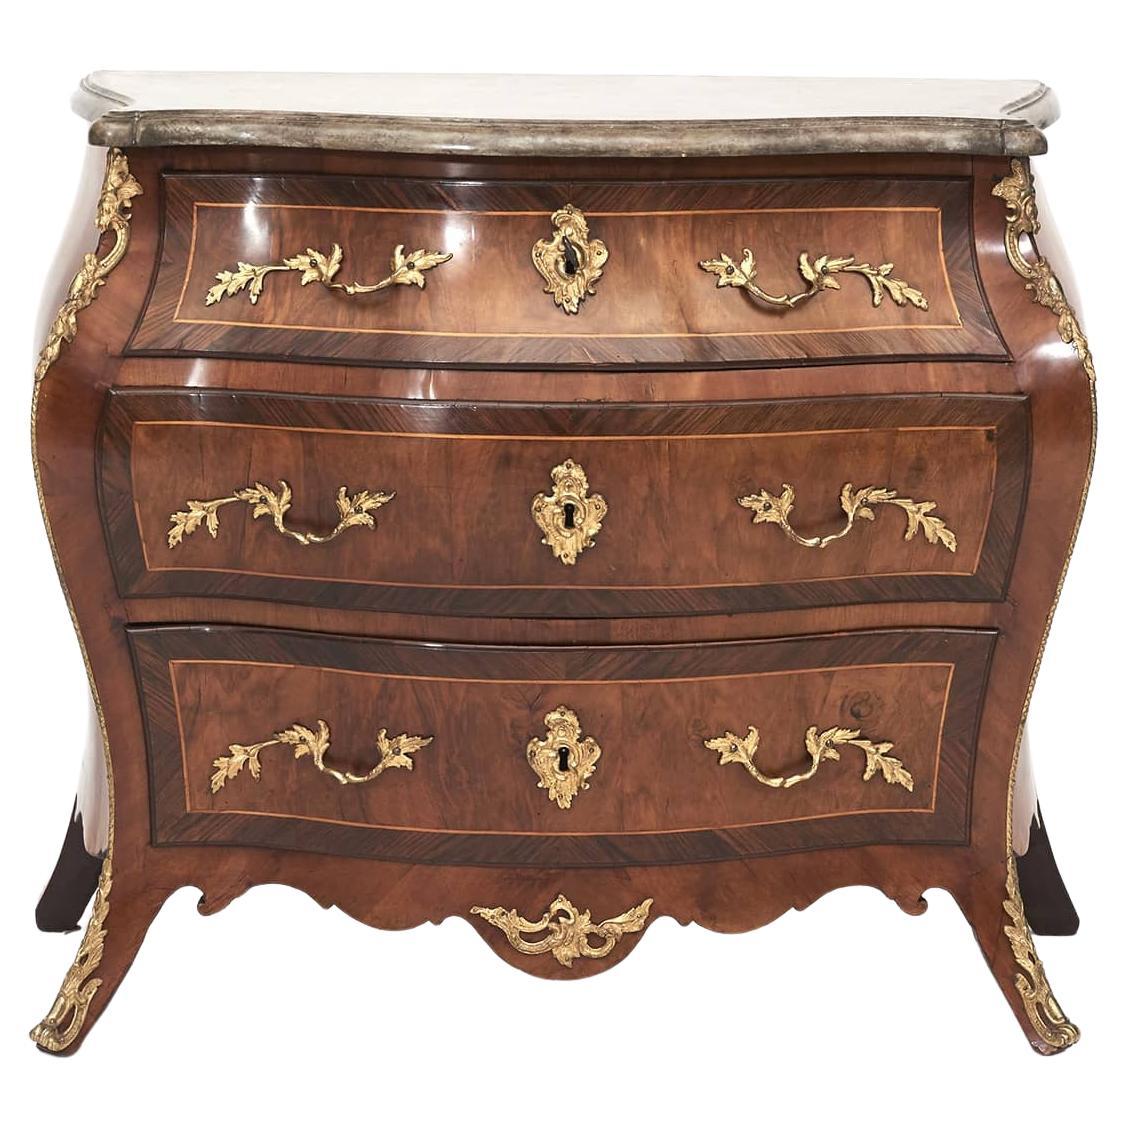 Bombé Shaped Swedish Rococo Chest Drawers with Øland Stone Top, 1760-1770